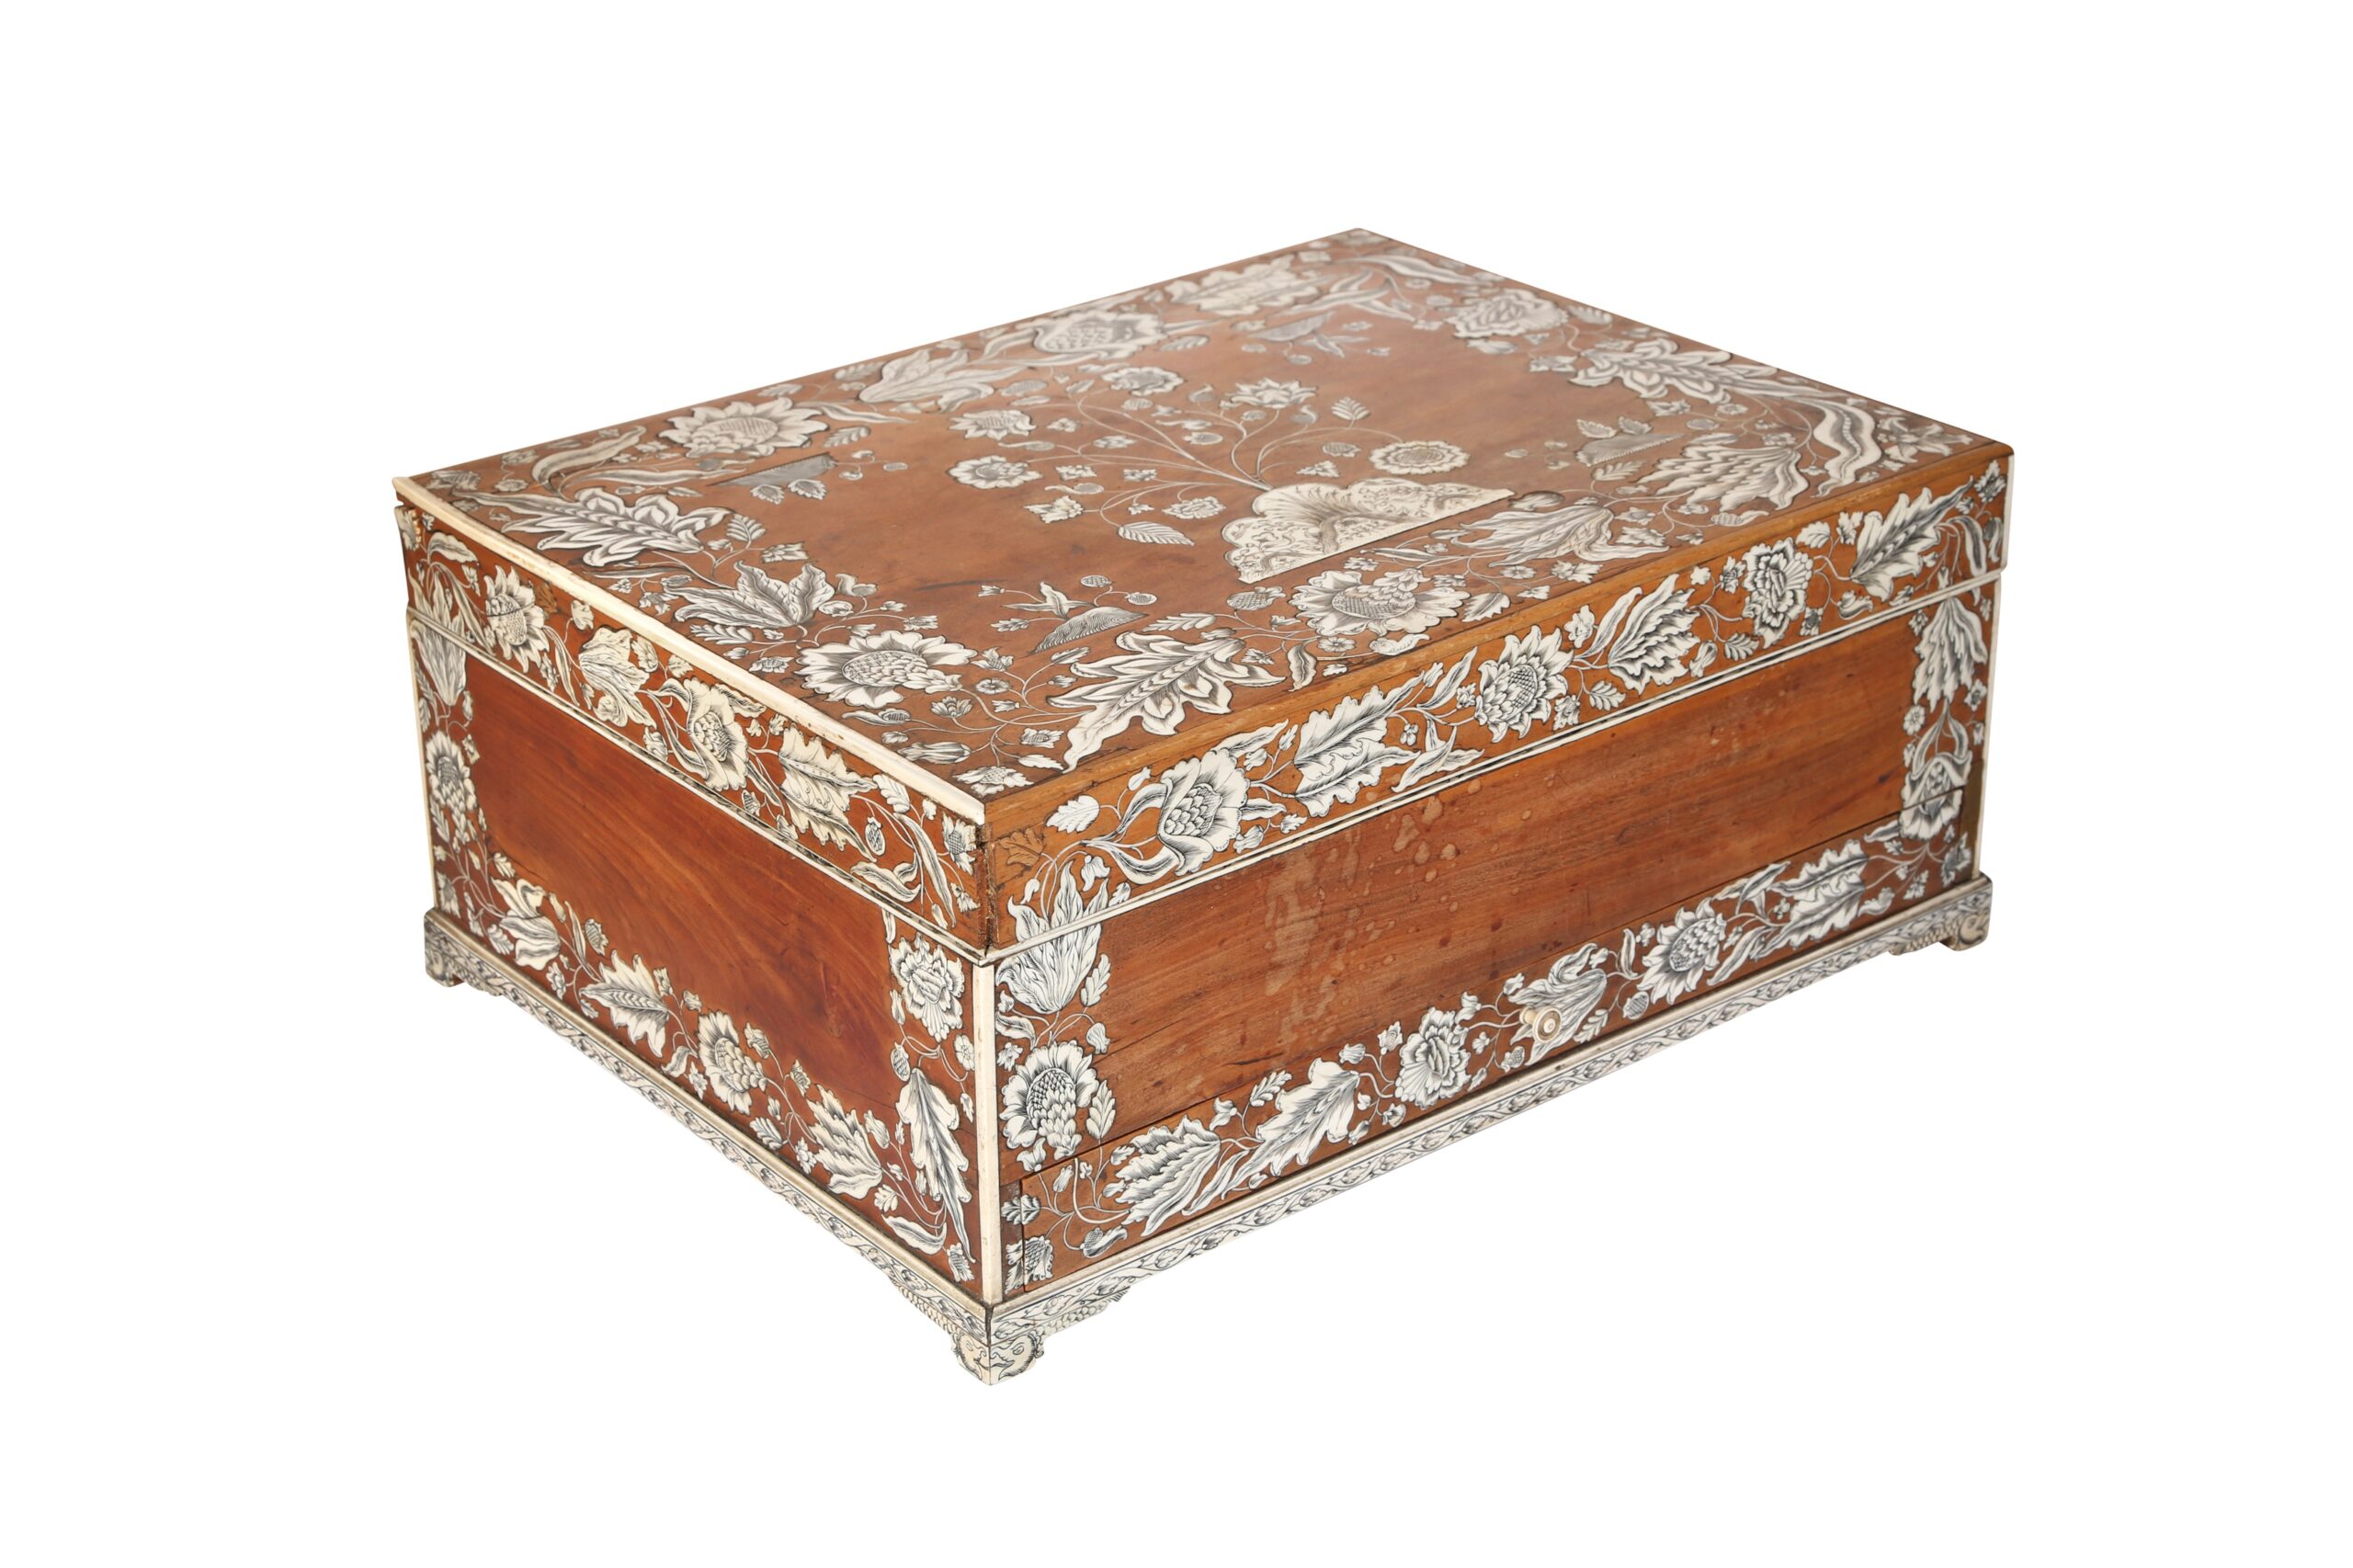 Lot 261. A LARGE ANGLO-INDIAN ROSEWOOD AND IVORY-INLAID DRESSING BOX WITH STAND Vizagapatam, Andhra Pradesh, Eastern Coromandel Coast of India, mid-18th century.  Sold for £4,000